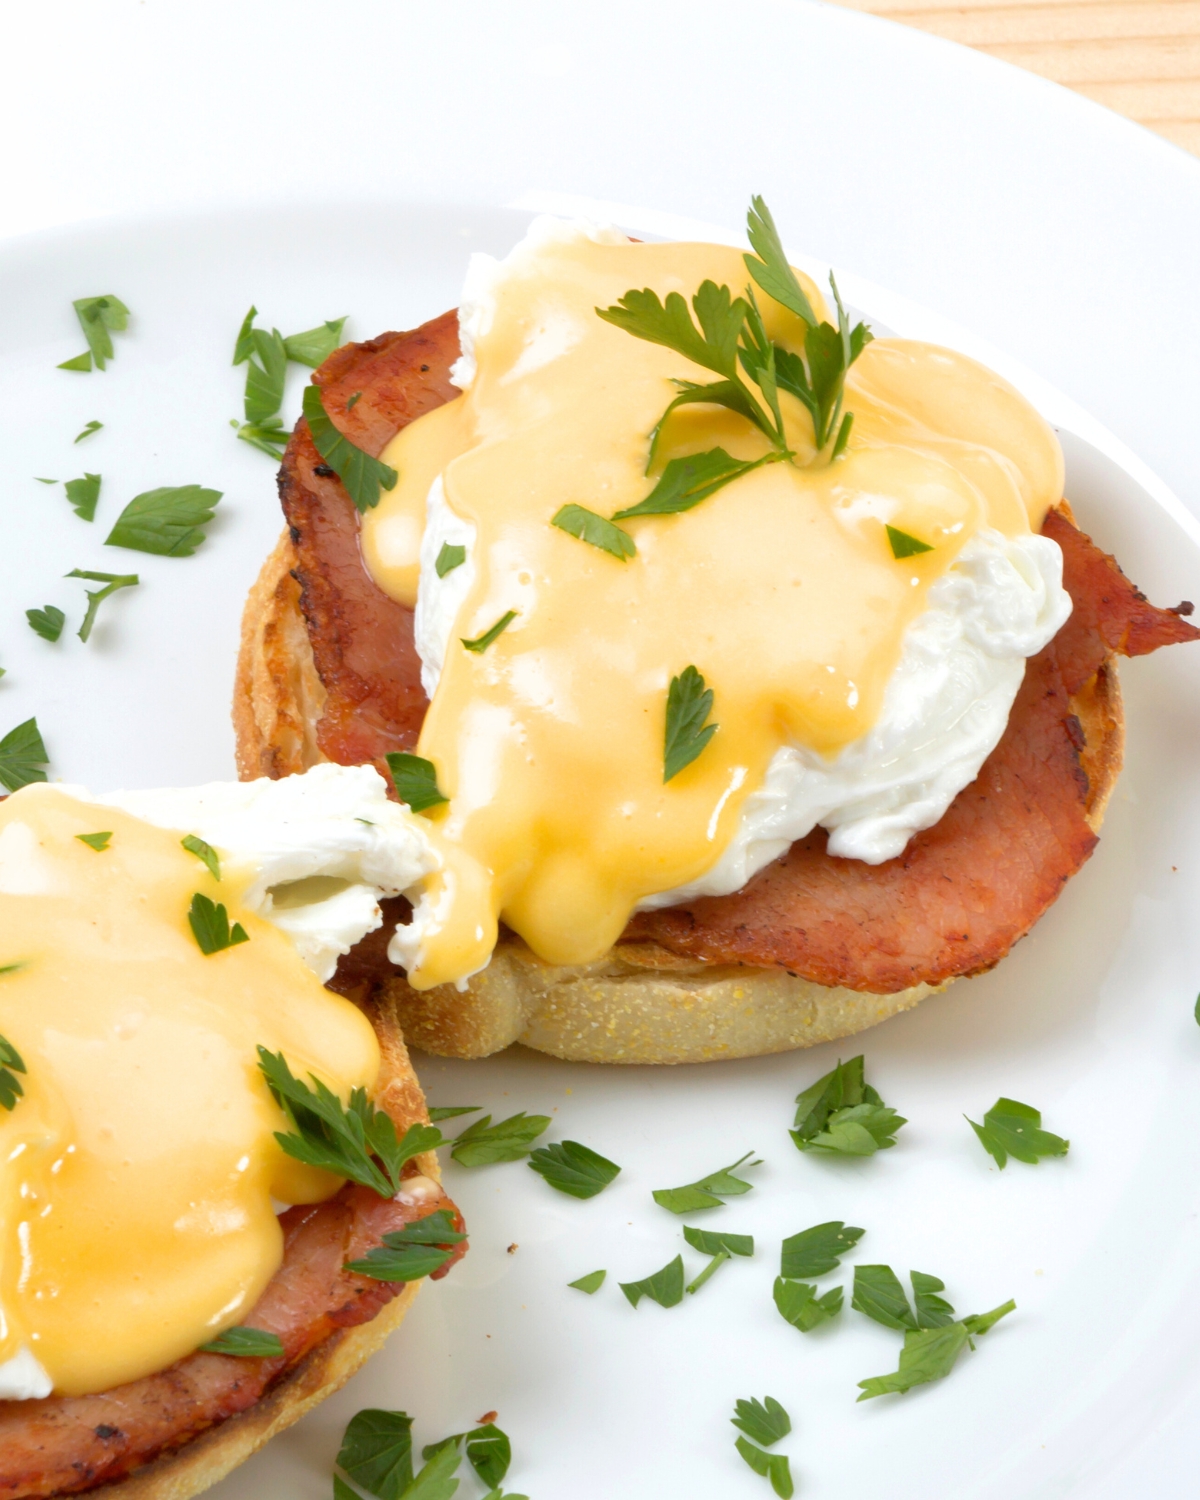 Easy Eggs Benedict - poached eggs with bacon and hollandaise sauce on a white plate